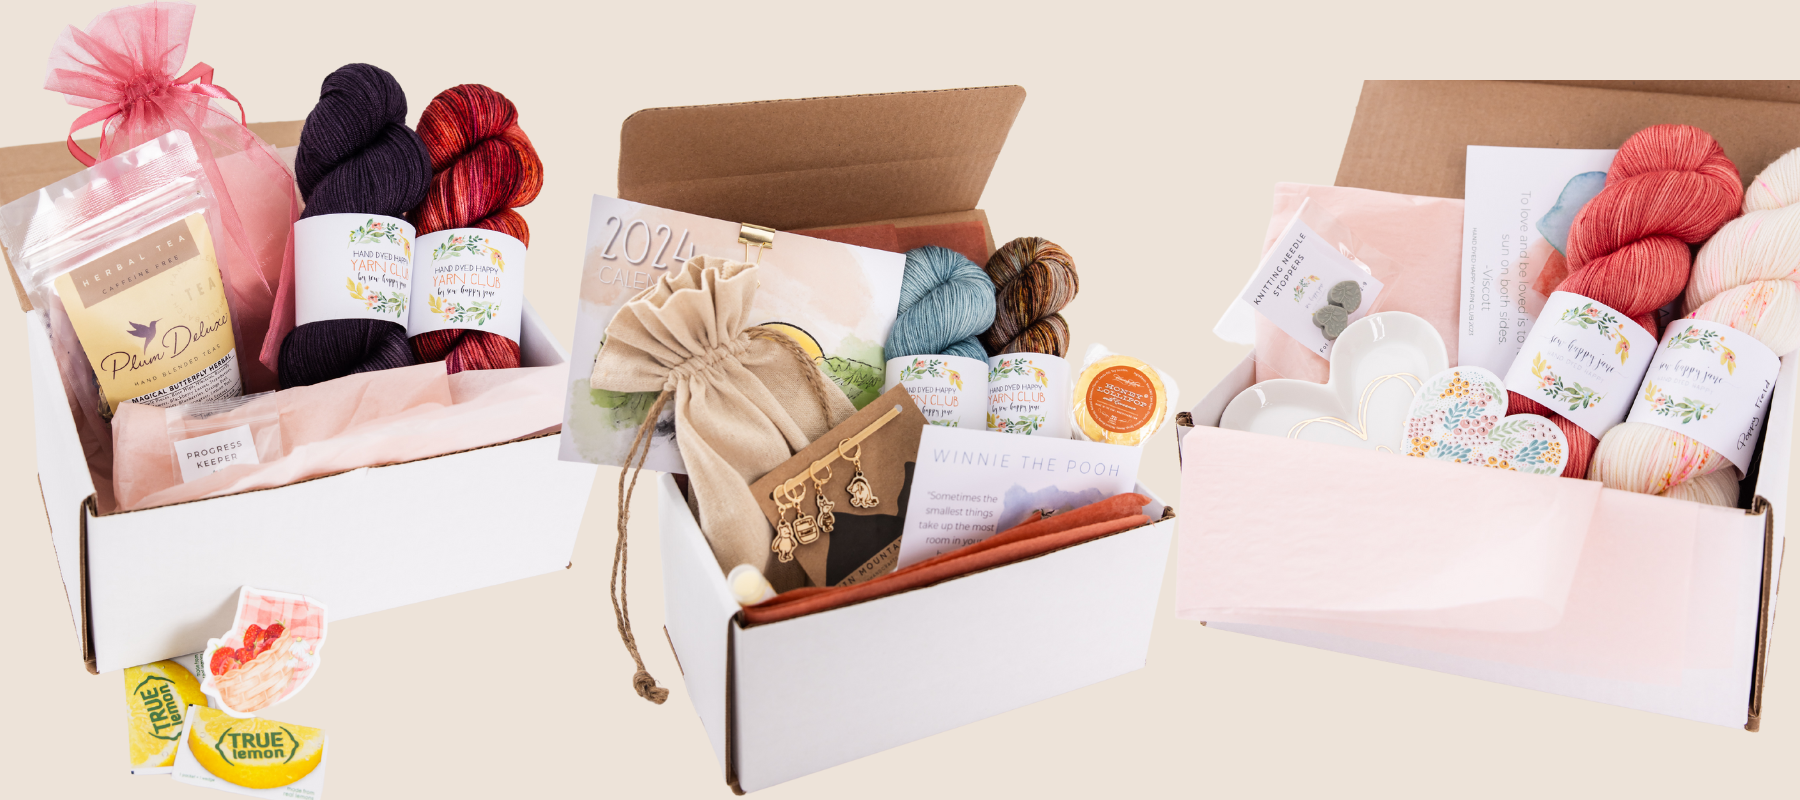 yarn club subscription boxes for knitters who love hand dyed yarn